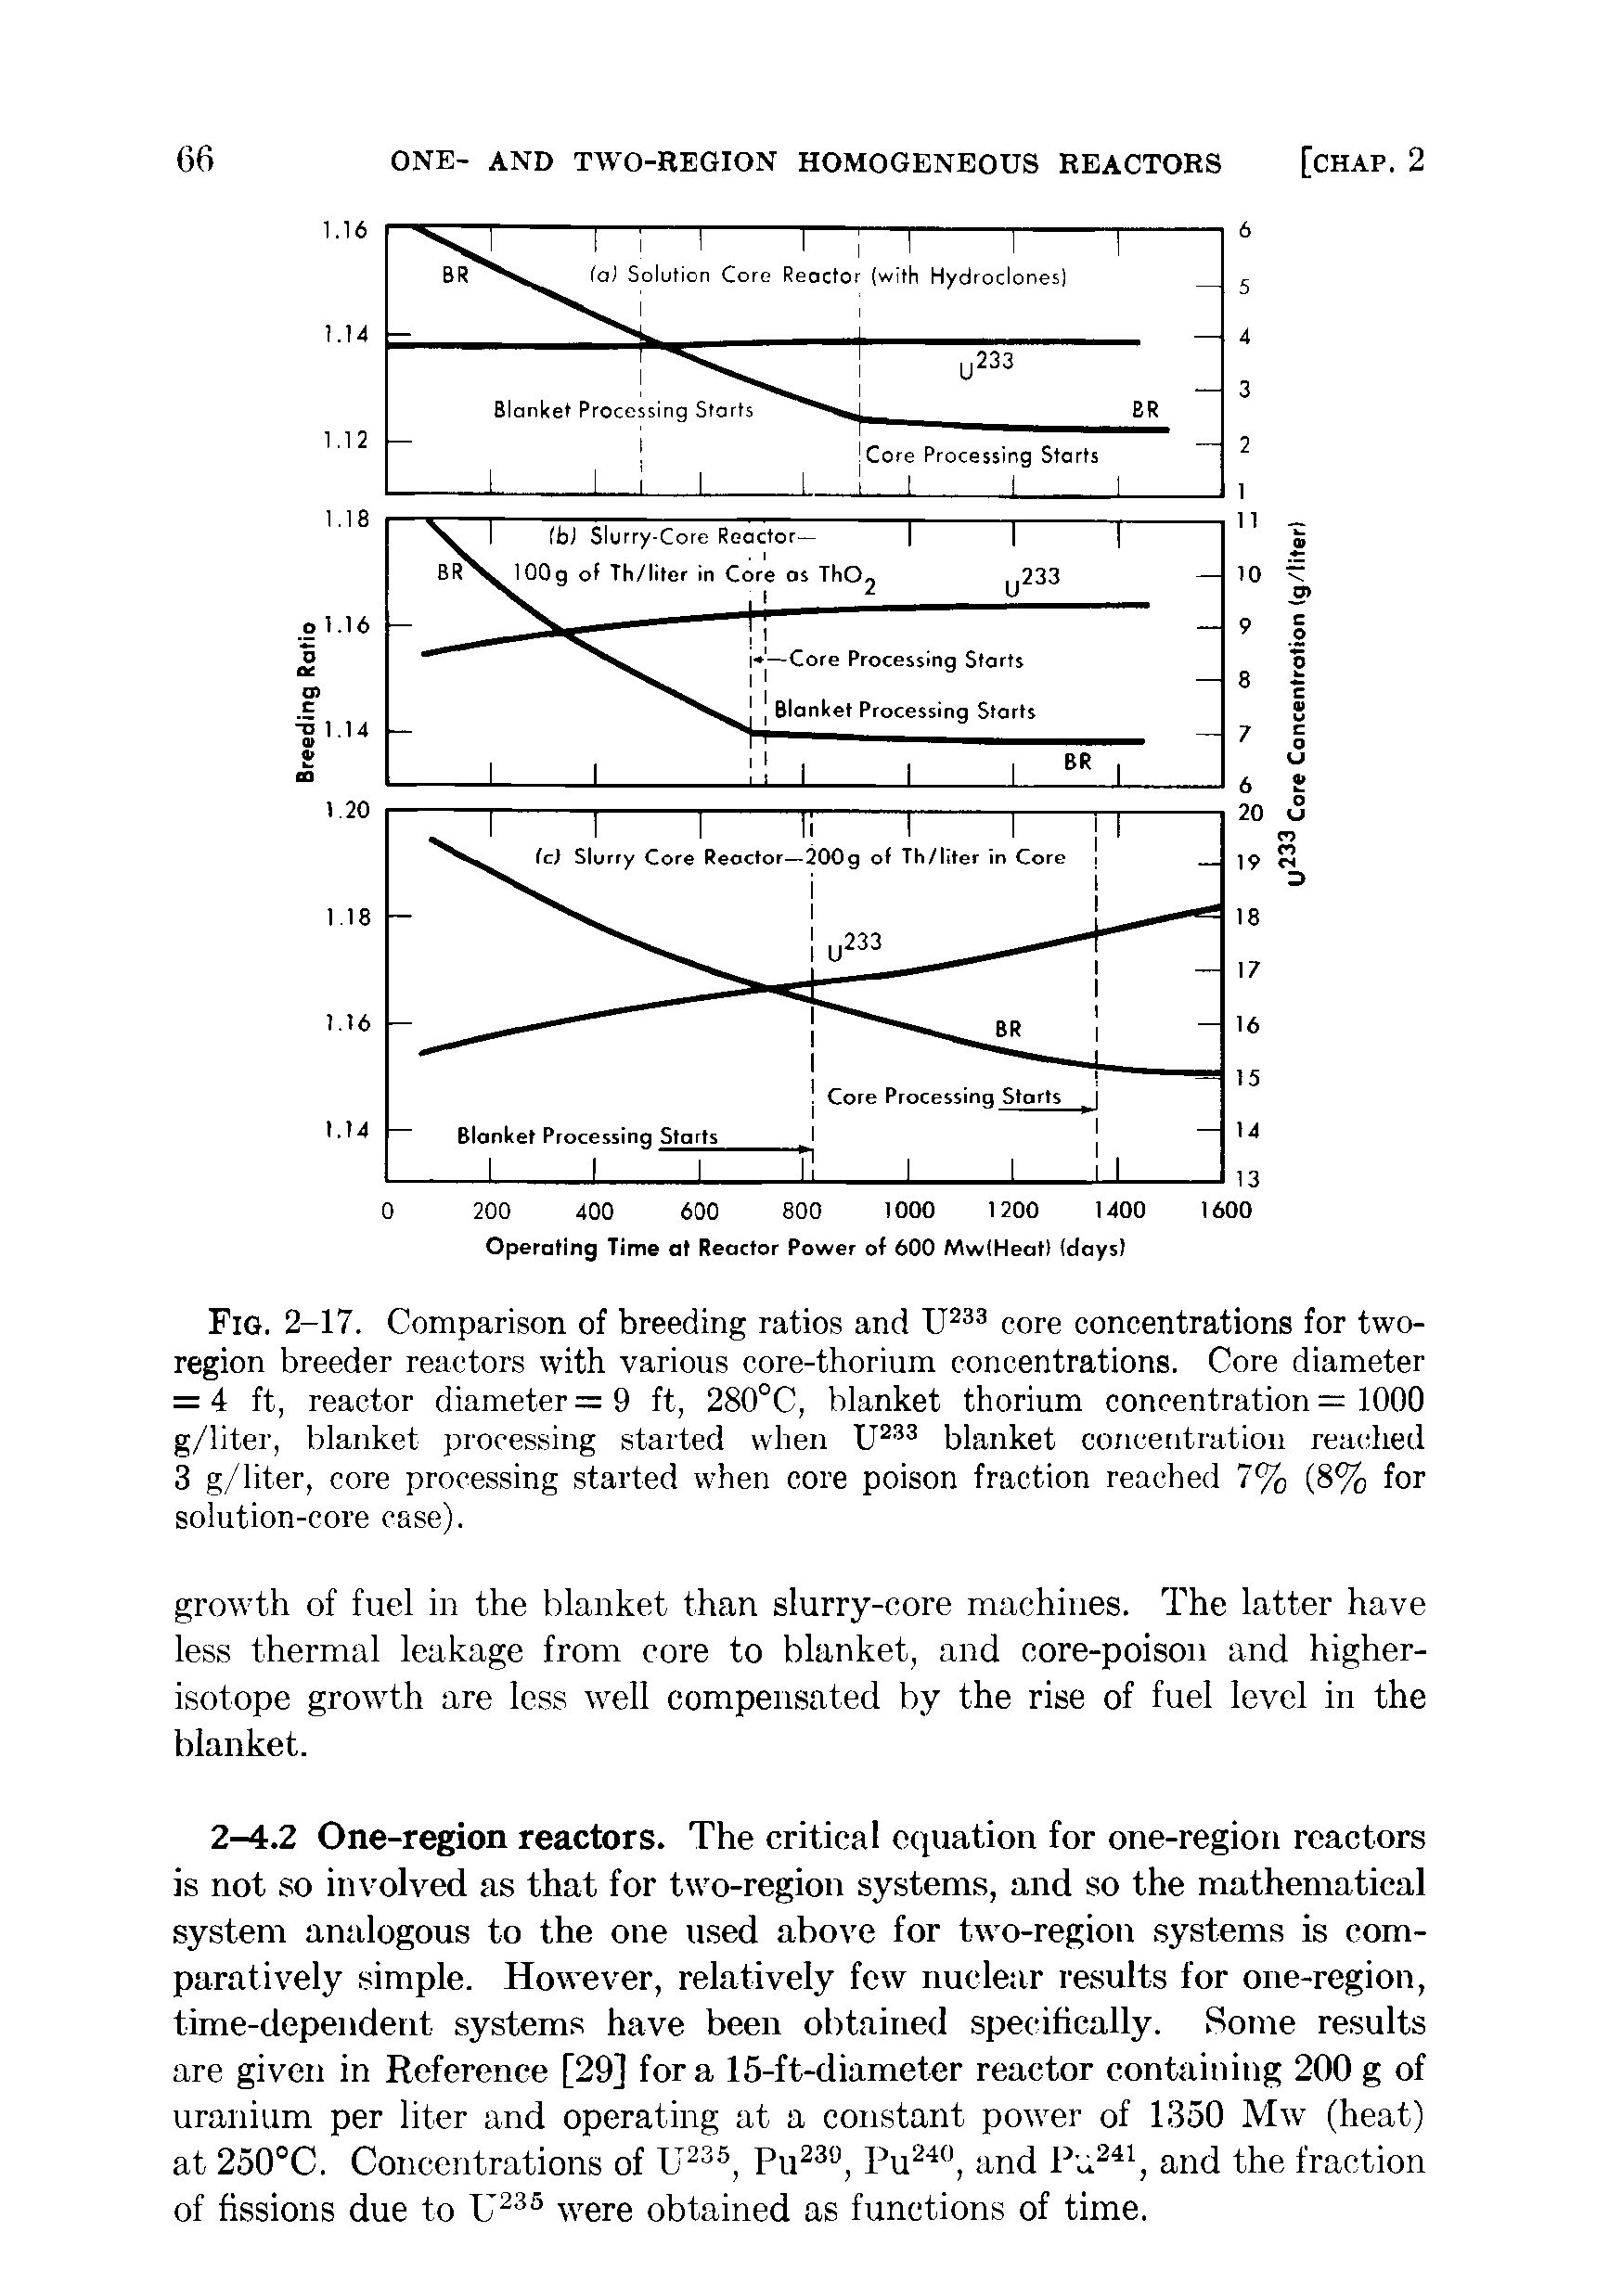 Fig. 2-17. Comparison of breeding ratios and core concentrations for two-region breeder reactors with various core-thorium concentrations. Core diameter = 4 ft, reactor diameter =9 ft, 280°C, blanket thorium concentration = 1000 g/liter, blanket ))iocessing started when blanket concentration reached...